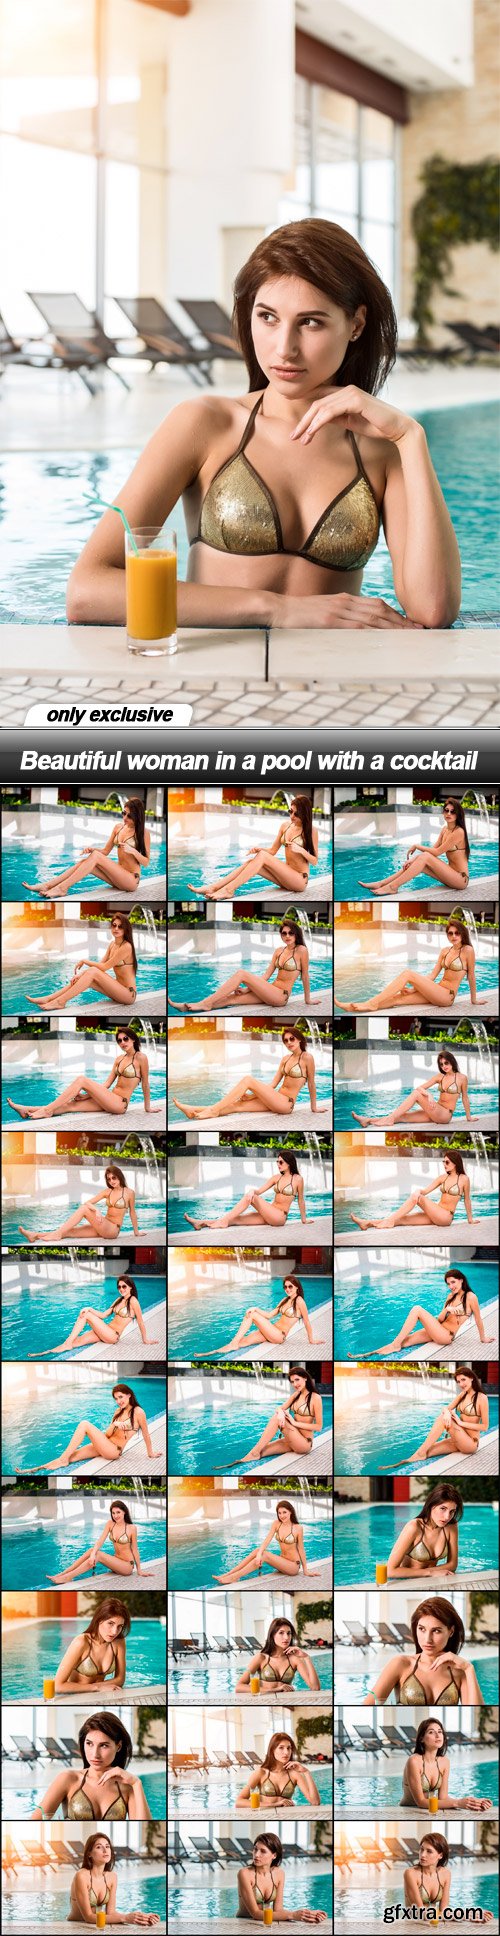 Beautiful woman in a pool with a cocktail - 30 UHQ JPEG